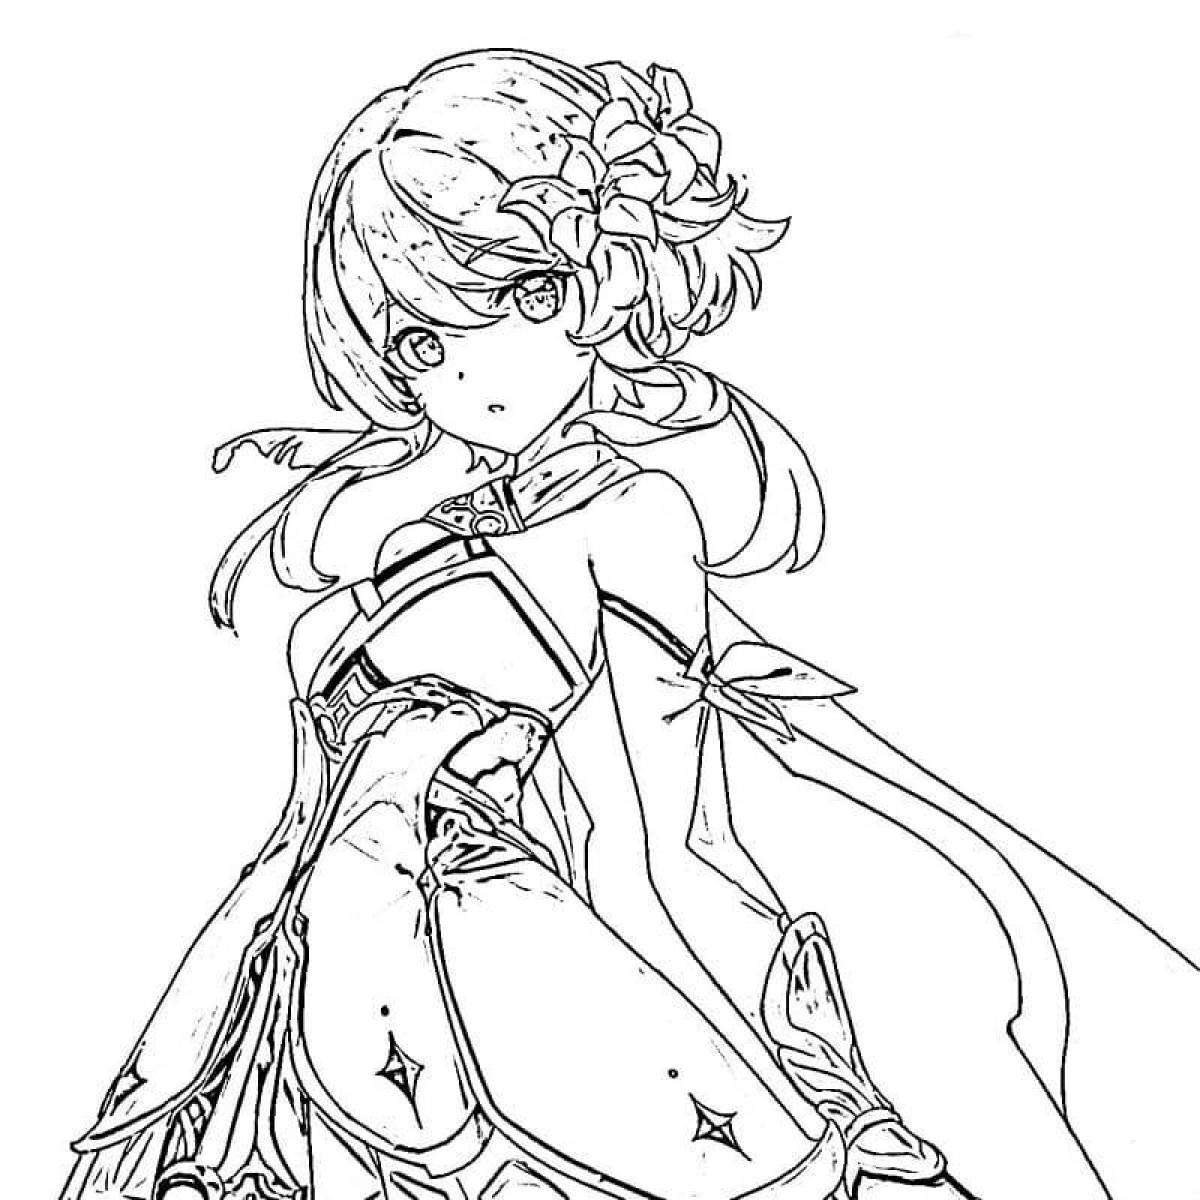 Xiao animated coloring page